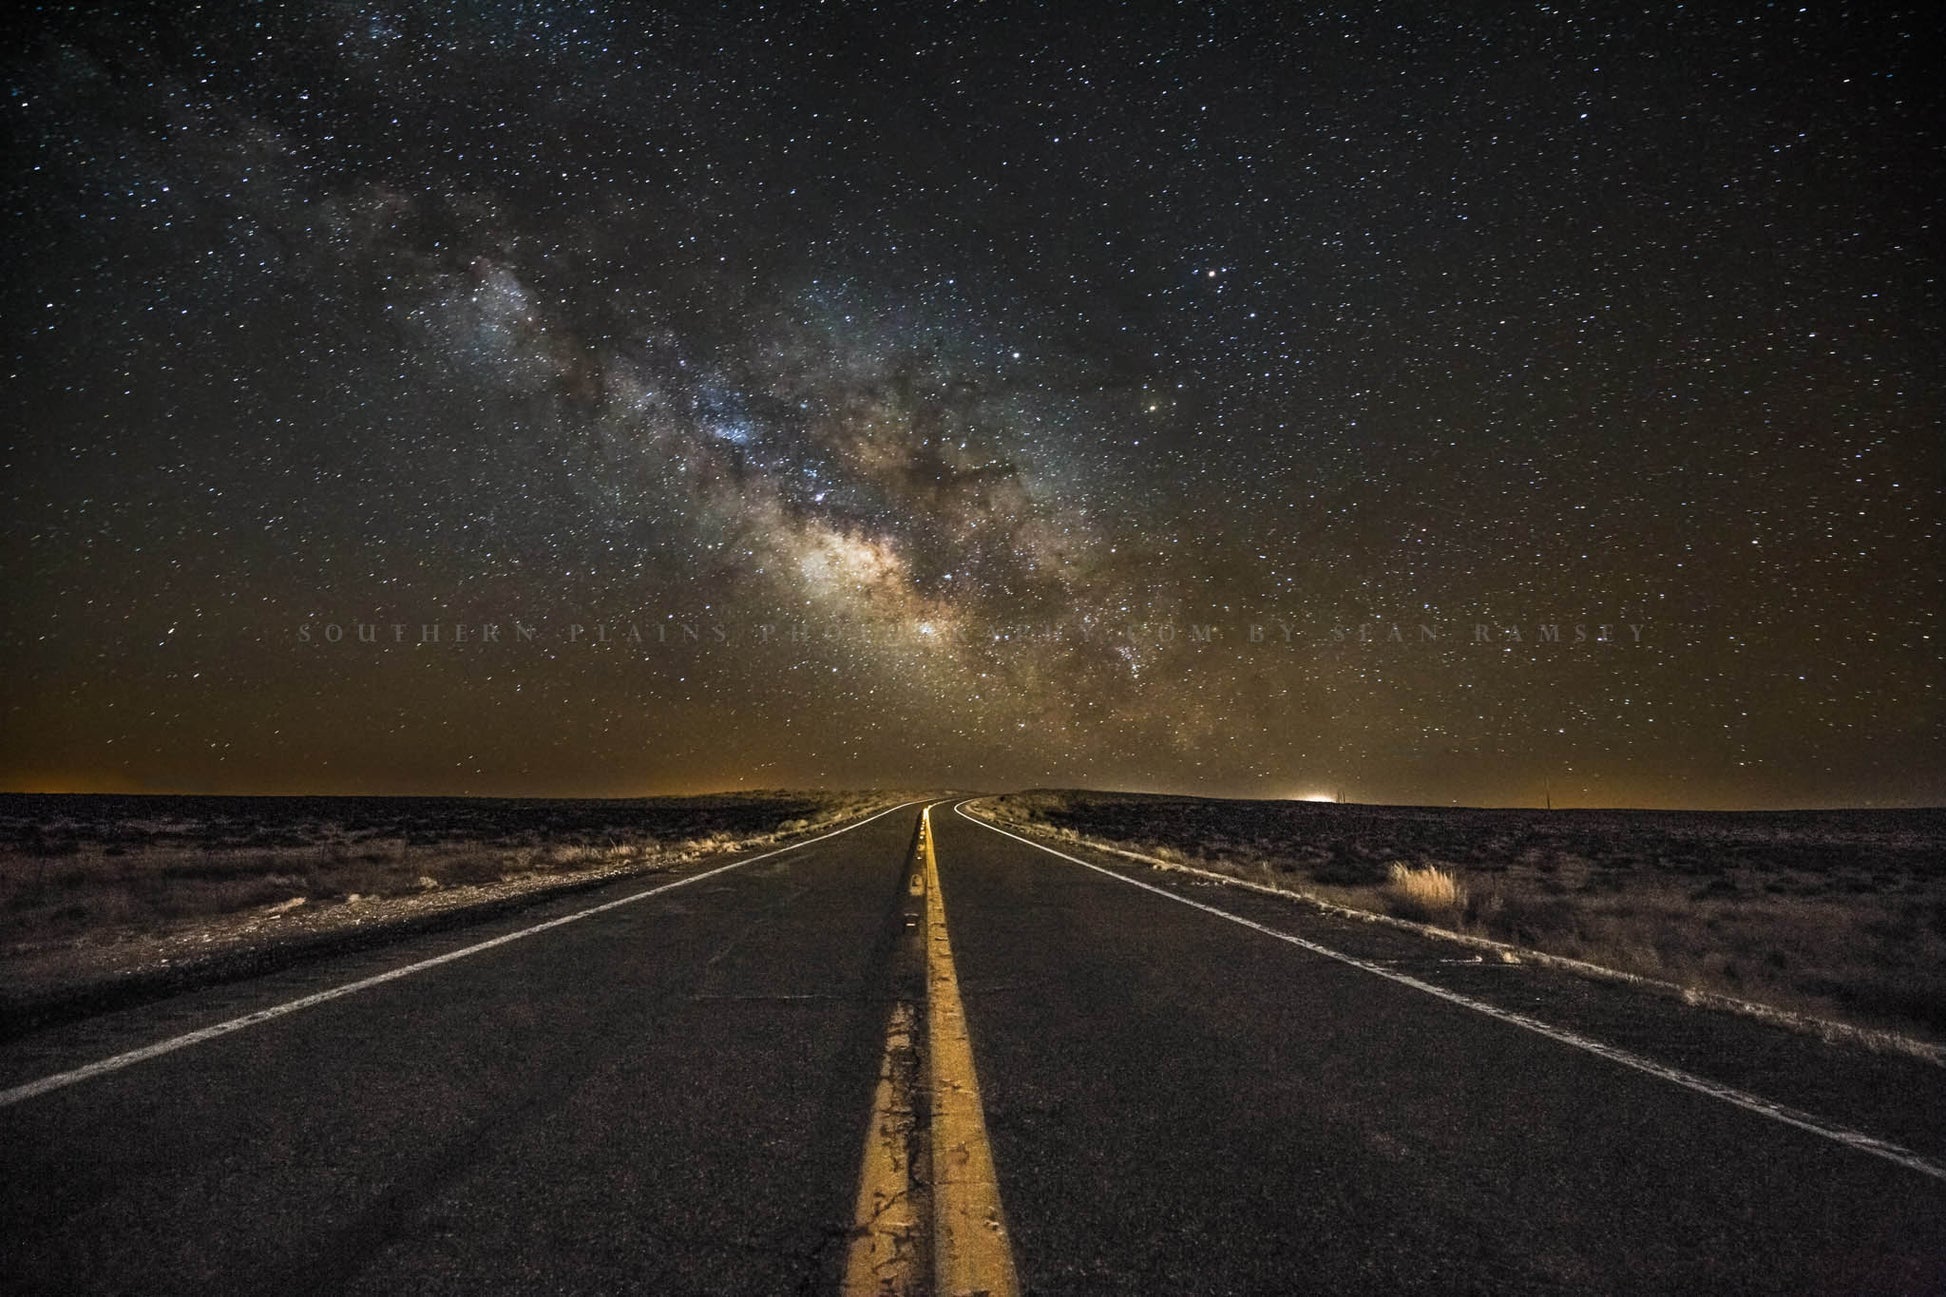 Wanderlust photography print of the Milky Way rising above a highway in the night sky on a starry night in the Arizona desert by Sean Ramsey of Southern Plains Photography.